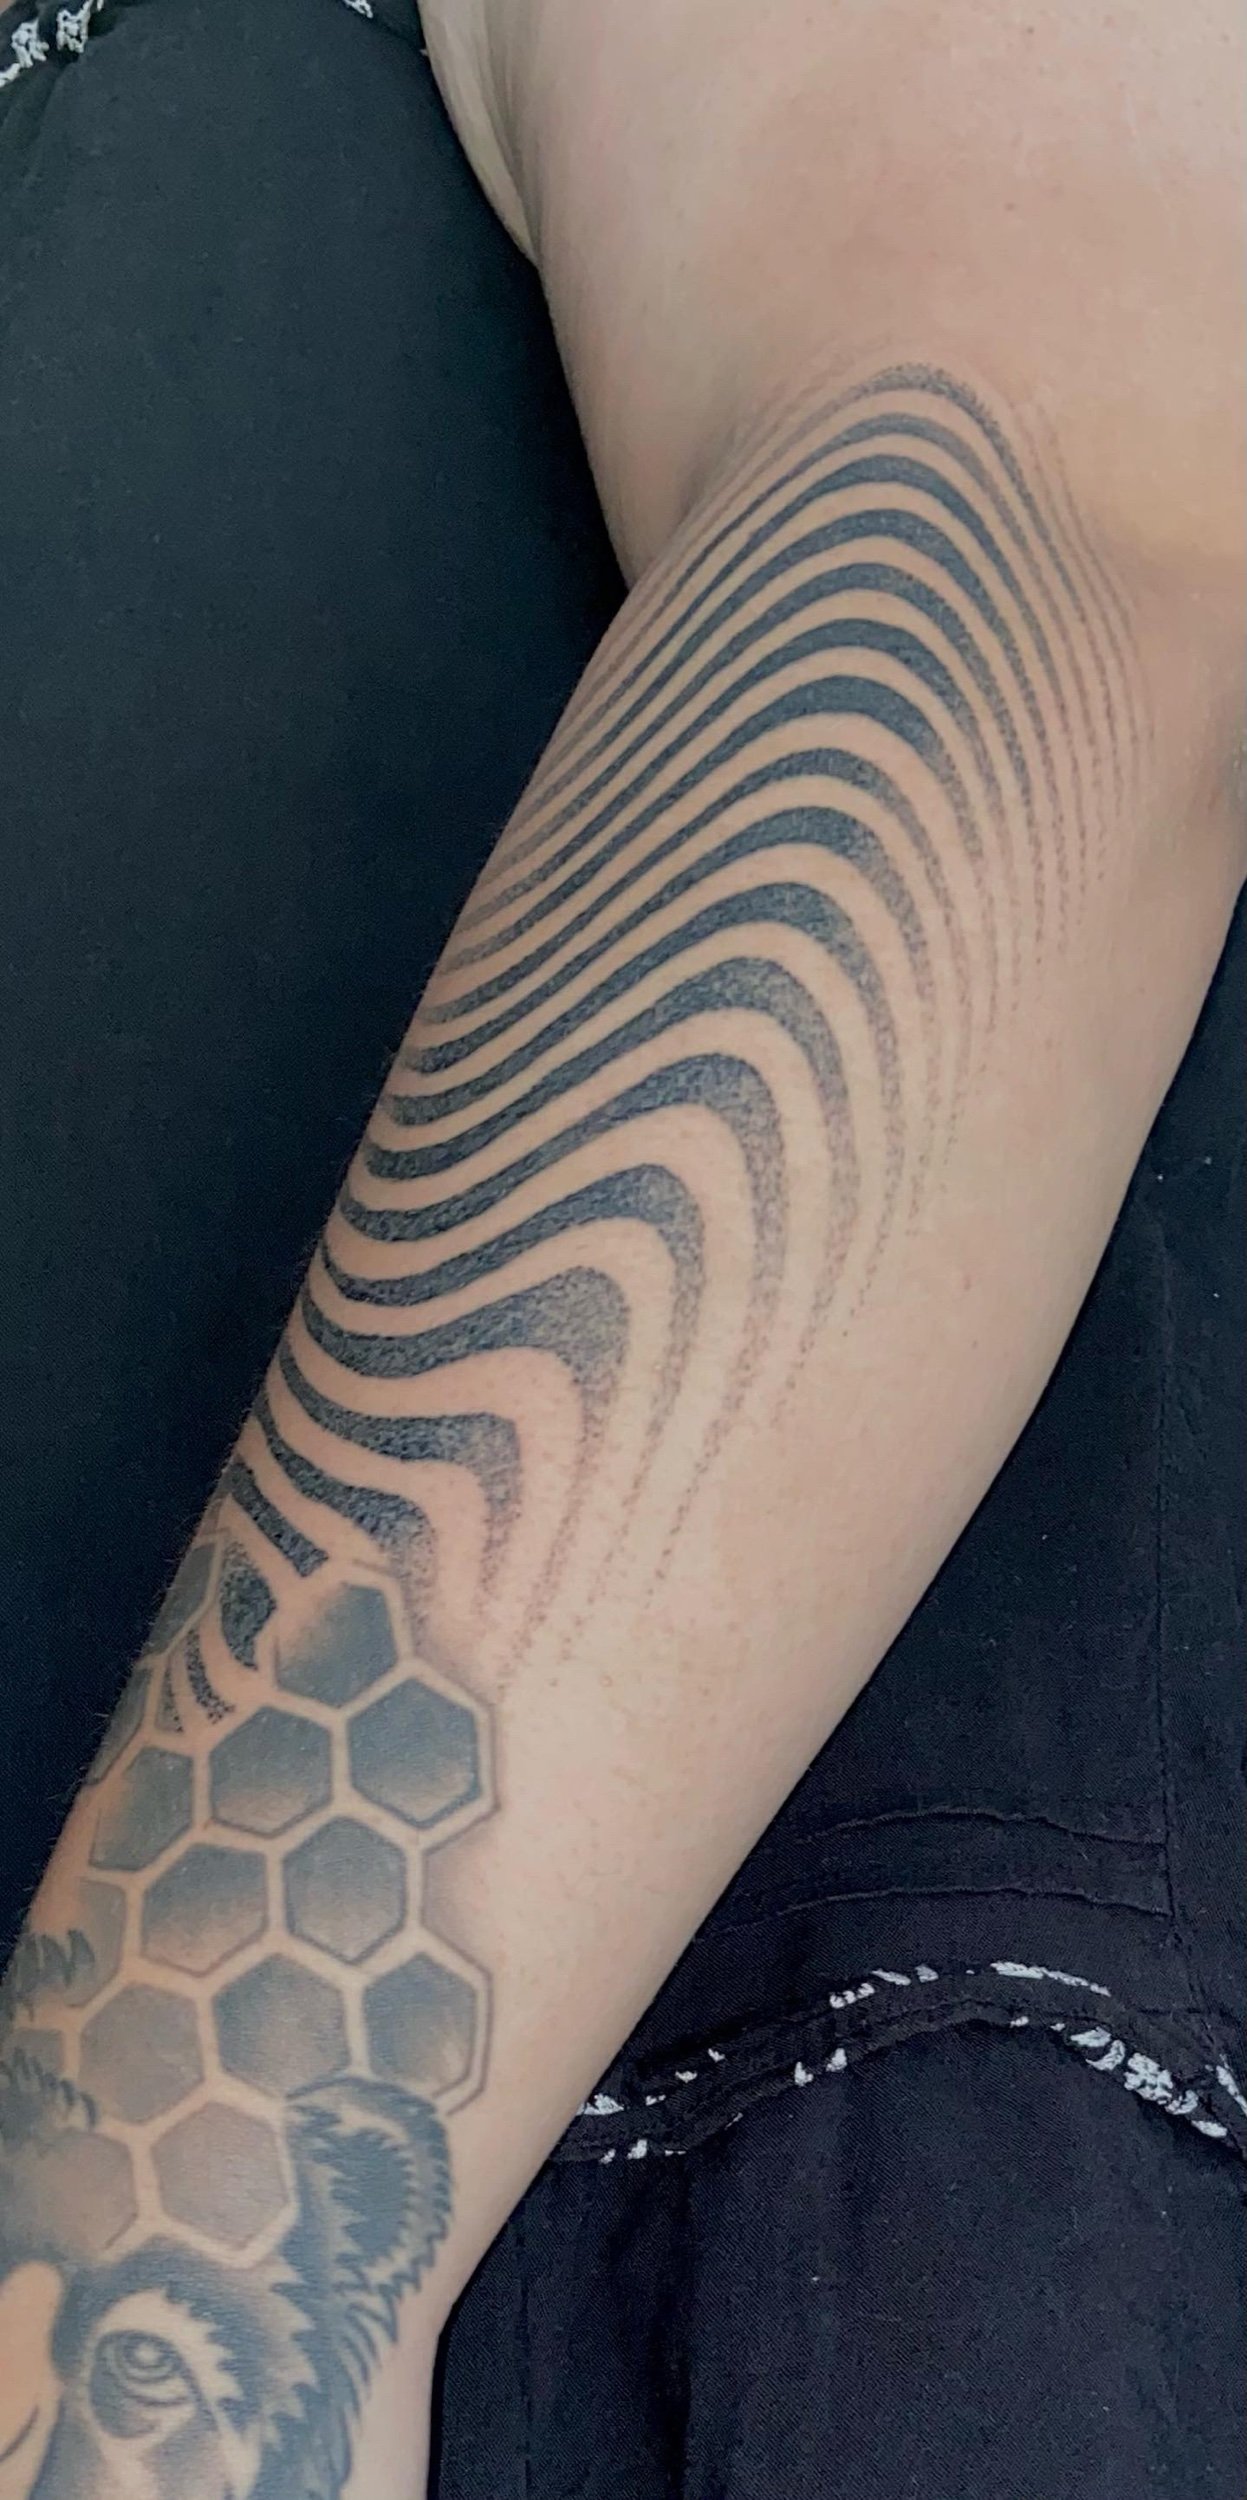 Arkane Tattoo & Laser Removal - Nautilus honeycomb and sacred geometry. .  All in one hit on Super tough client. :) Thanks for looking | Facebook